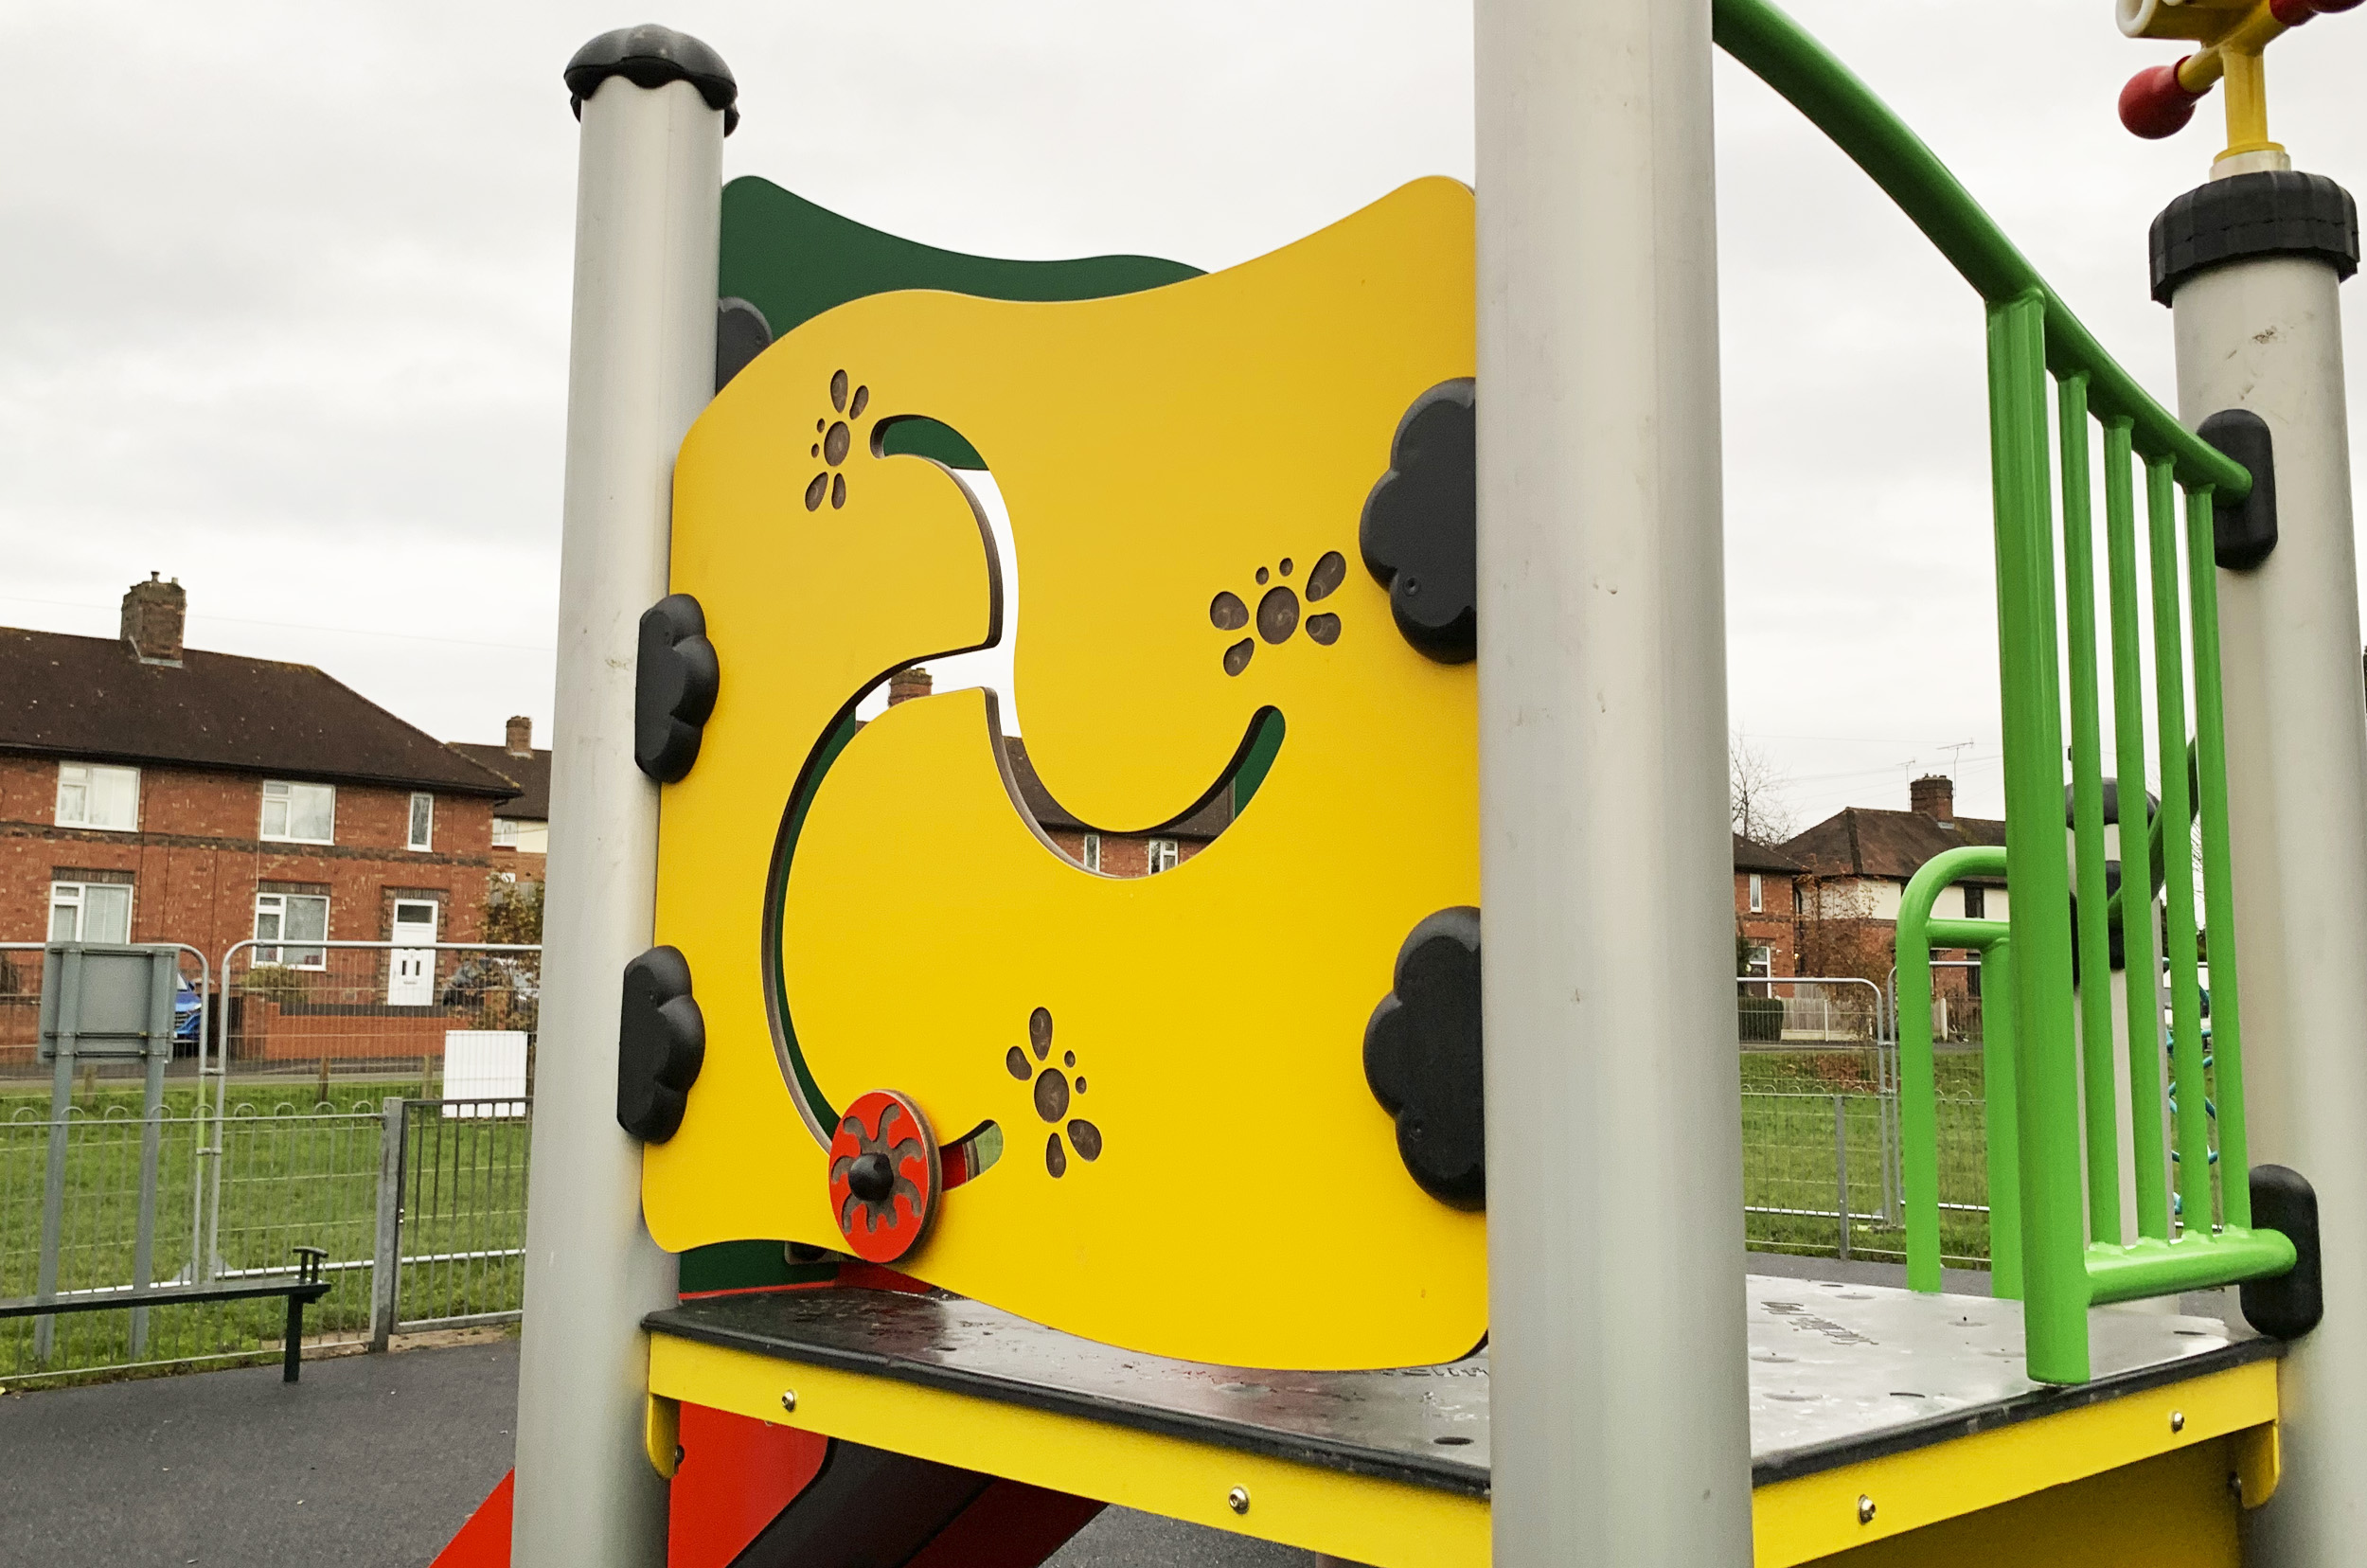 Spider Multiplay, yellow play panel with insect modifies